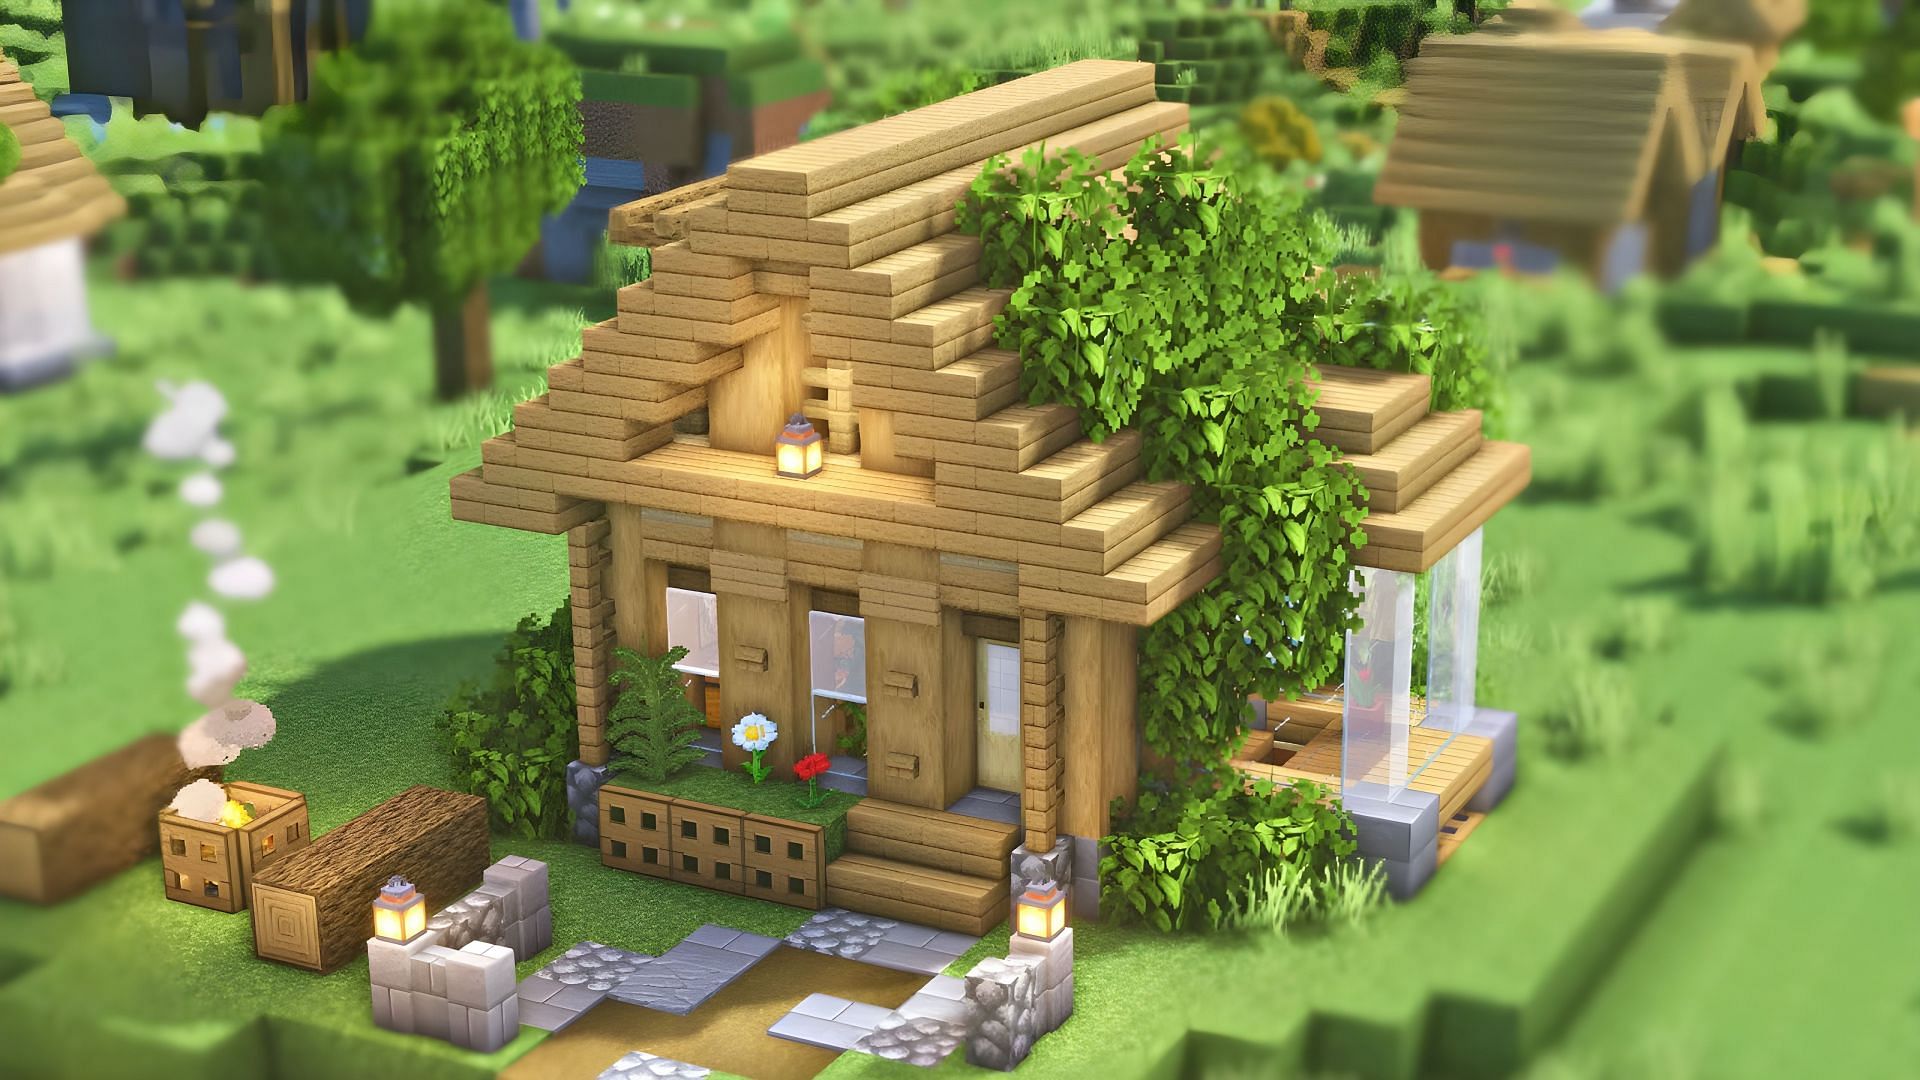 Minecraft small houses are some of the best builds (Image via Youtube/PlatinumThief)